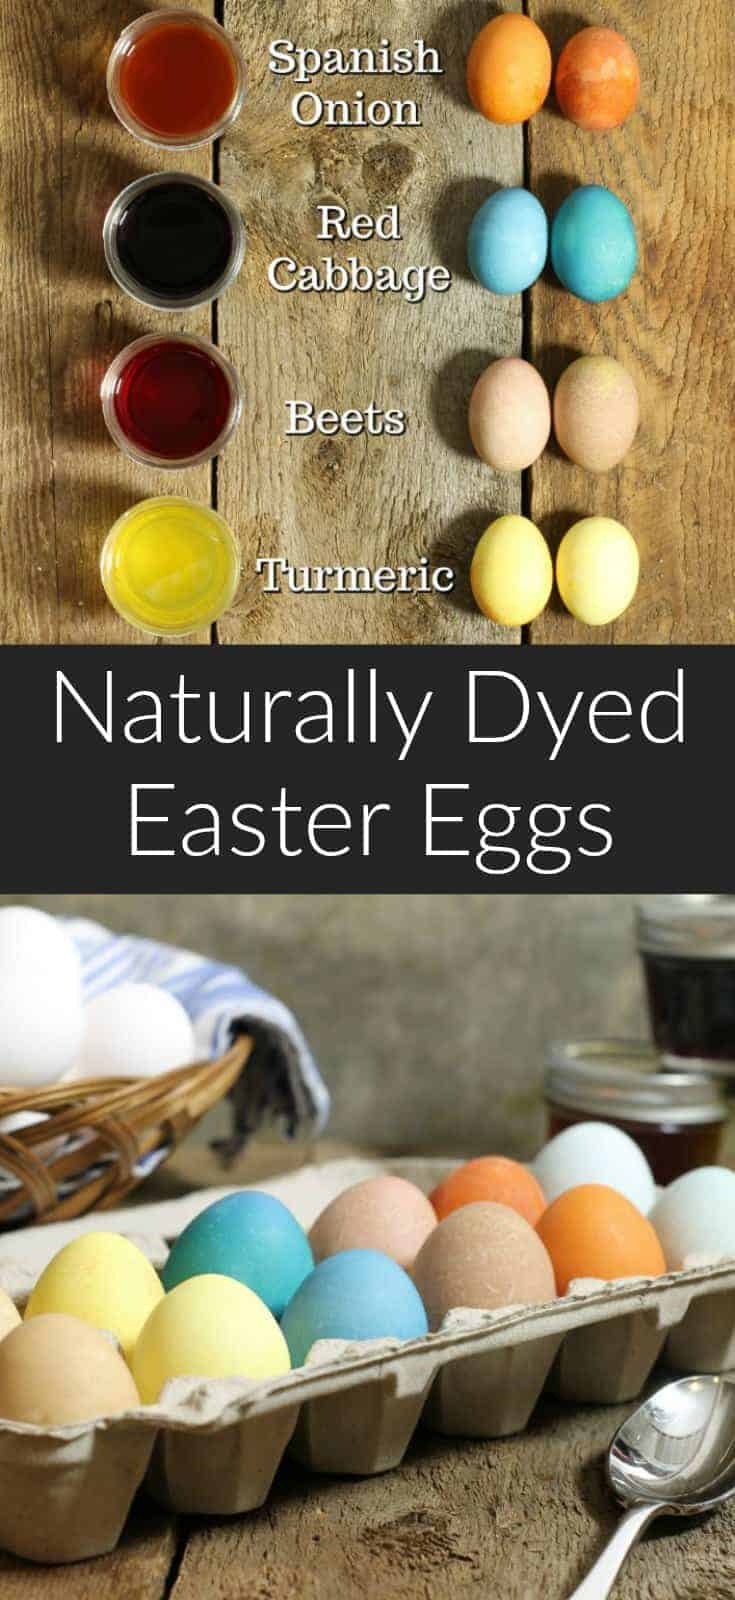 Naturally Dyed Easter Eggs using Plant Based Dyes